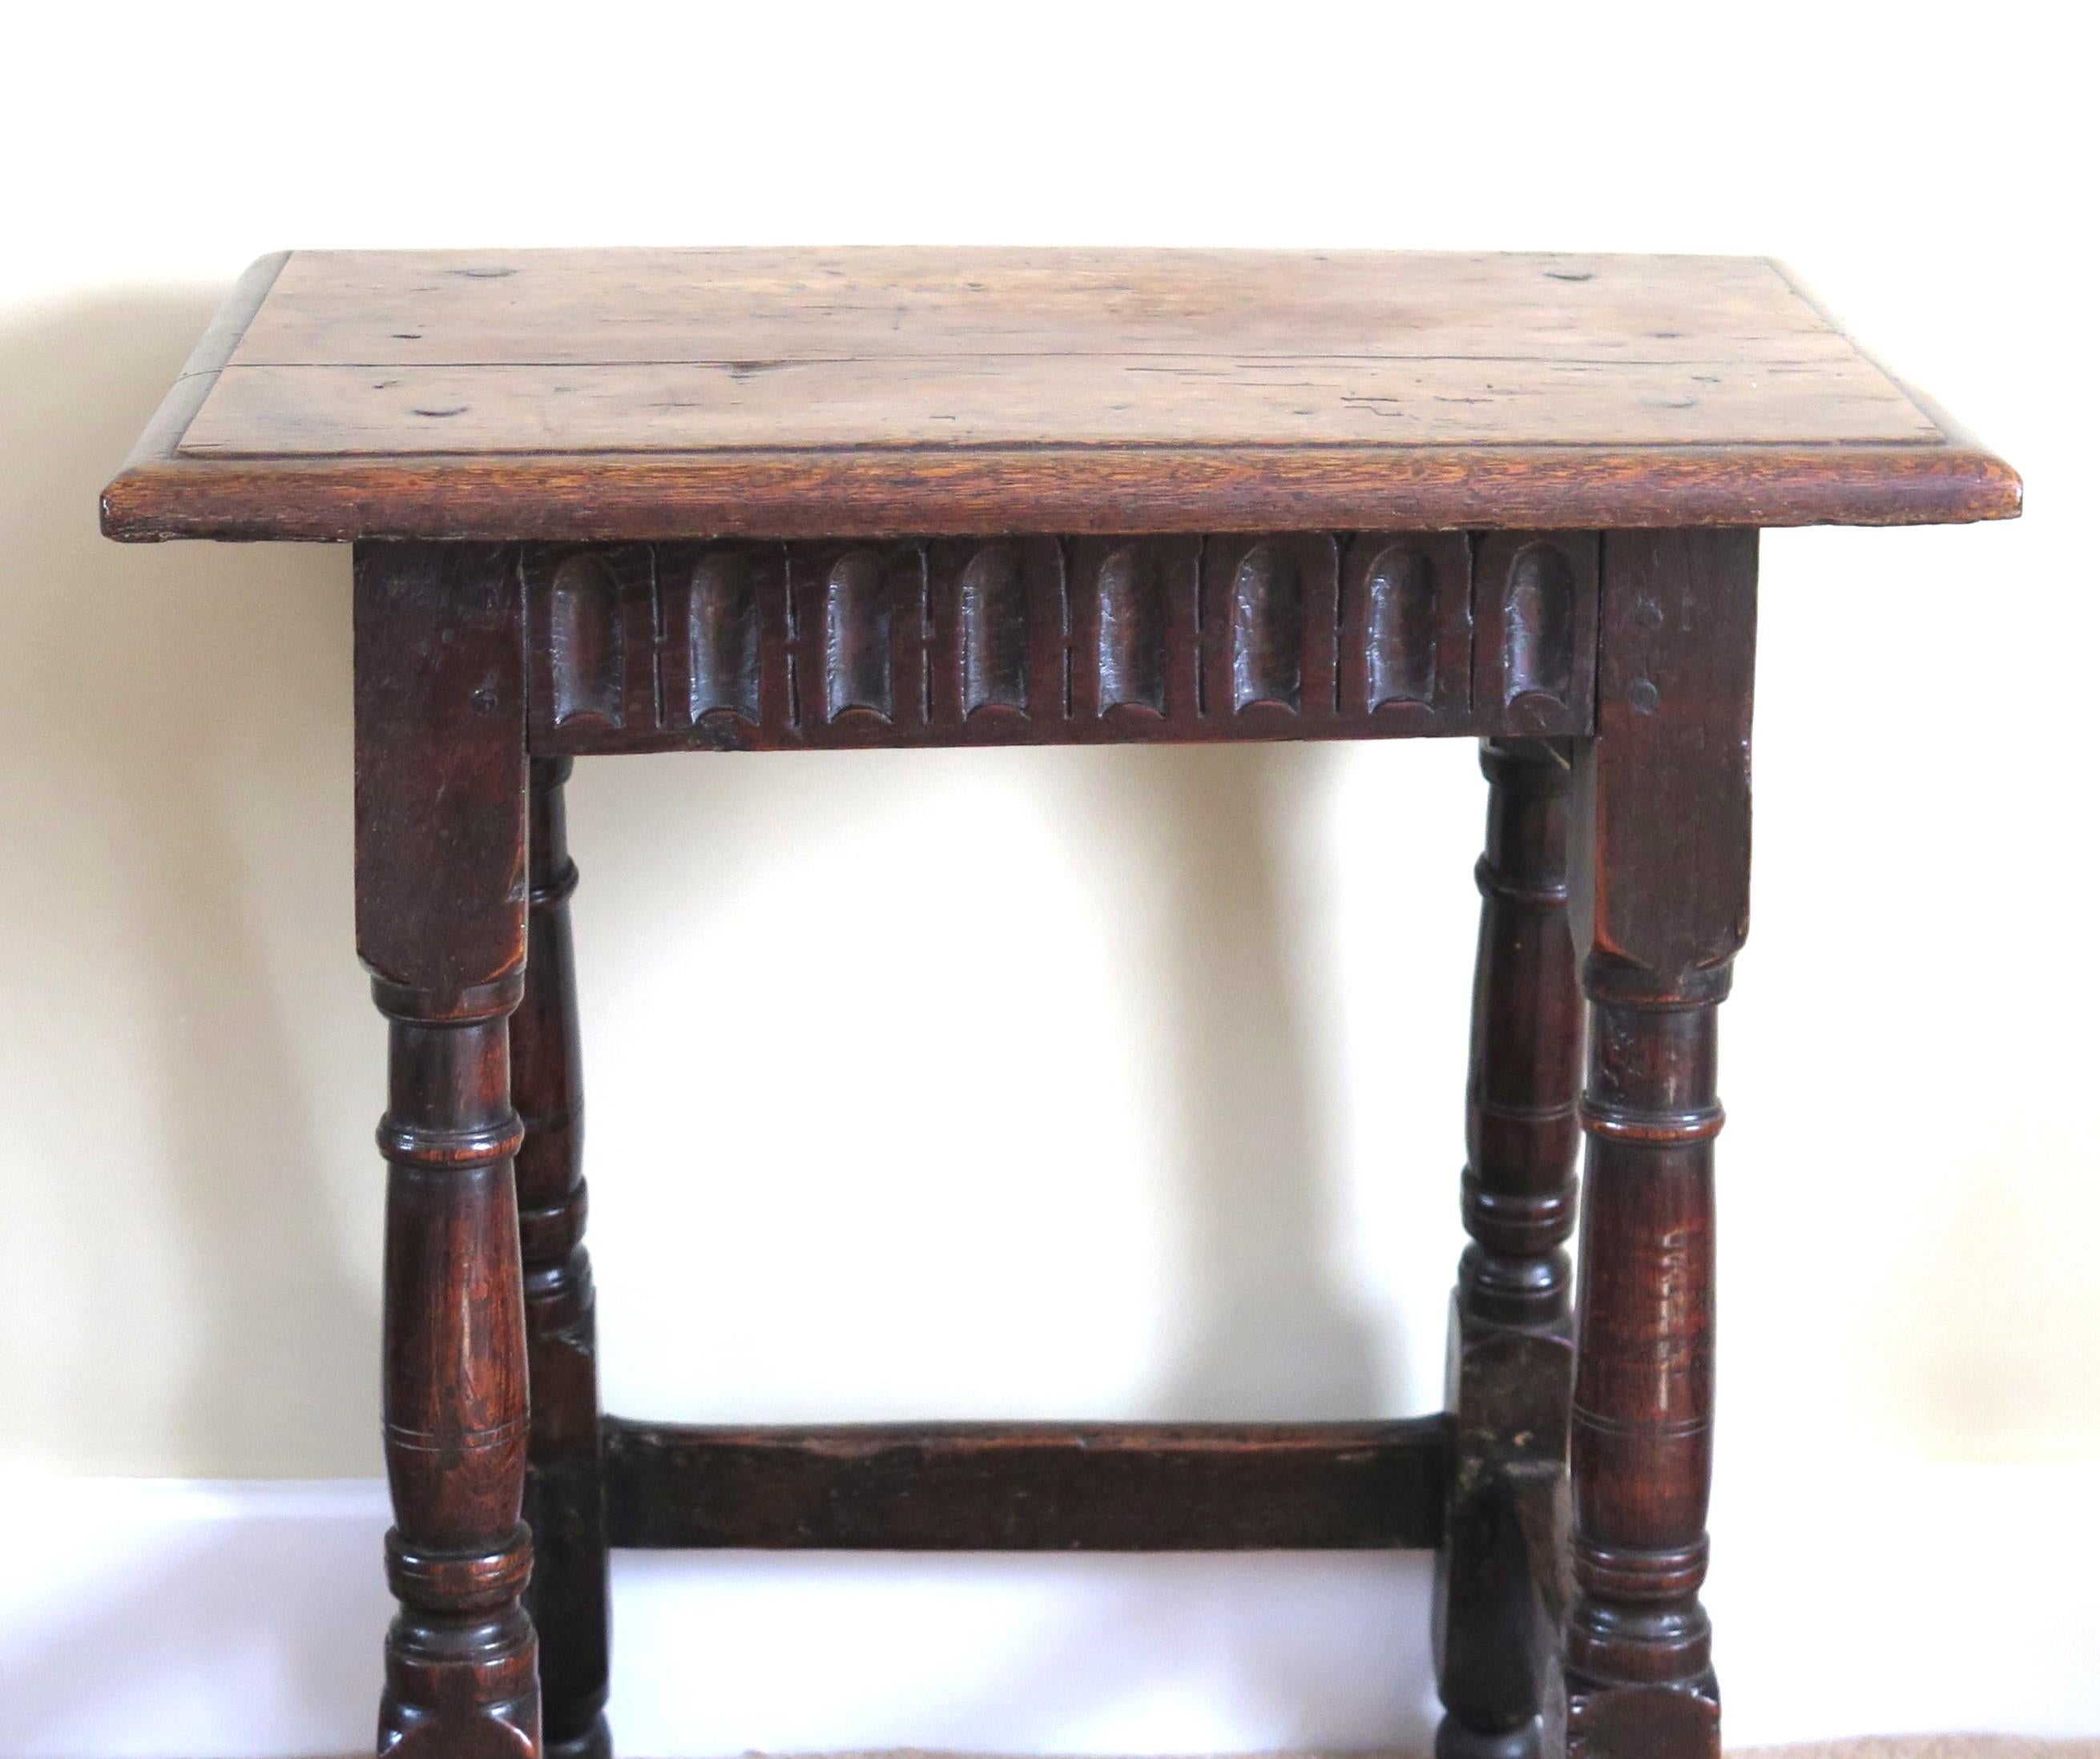 Hand-Crafted Charles 1st English Jointed Stool Oak, Early to Mid 17th Century, circa 1630 For Sale